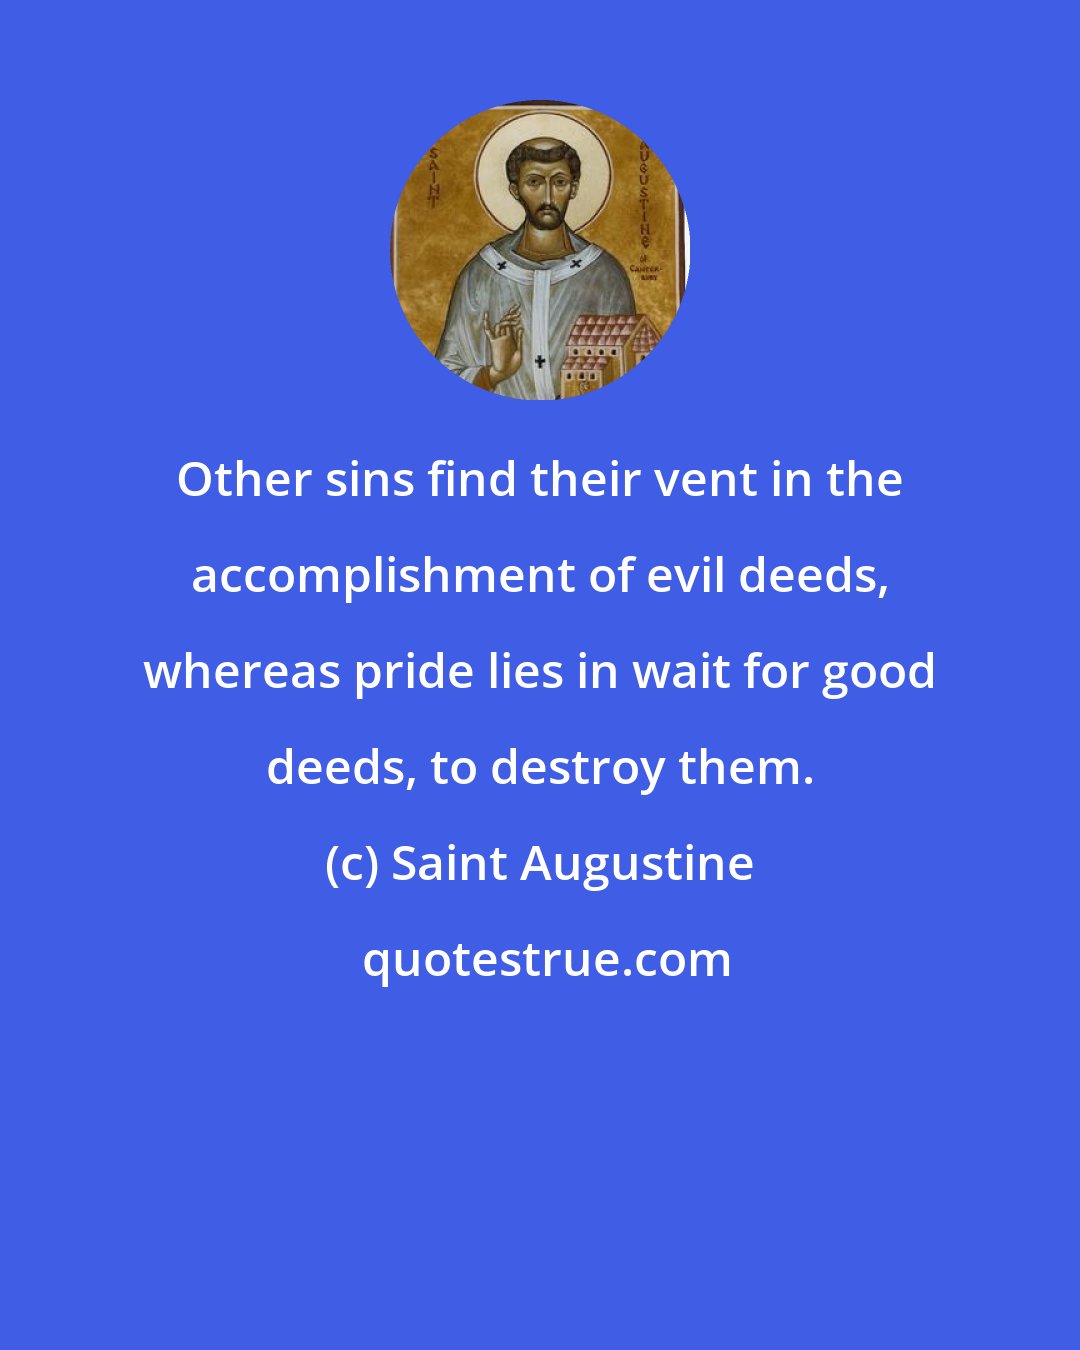 Saint Augustine: Other sins find their vent in the accomplishment of evil deeds, whereas pride lies in wait for good deeds, to destroy them.